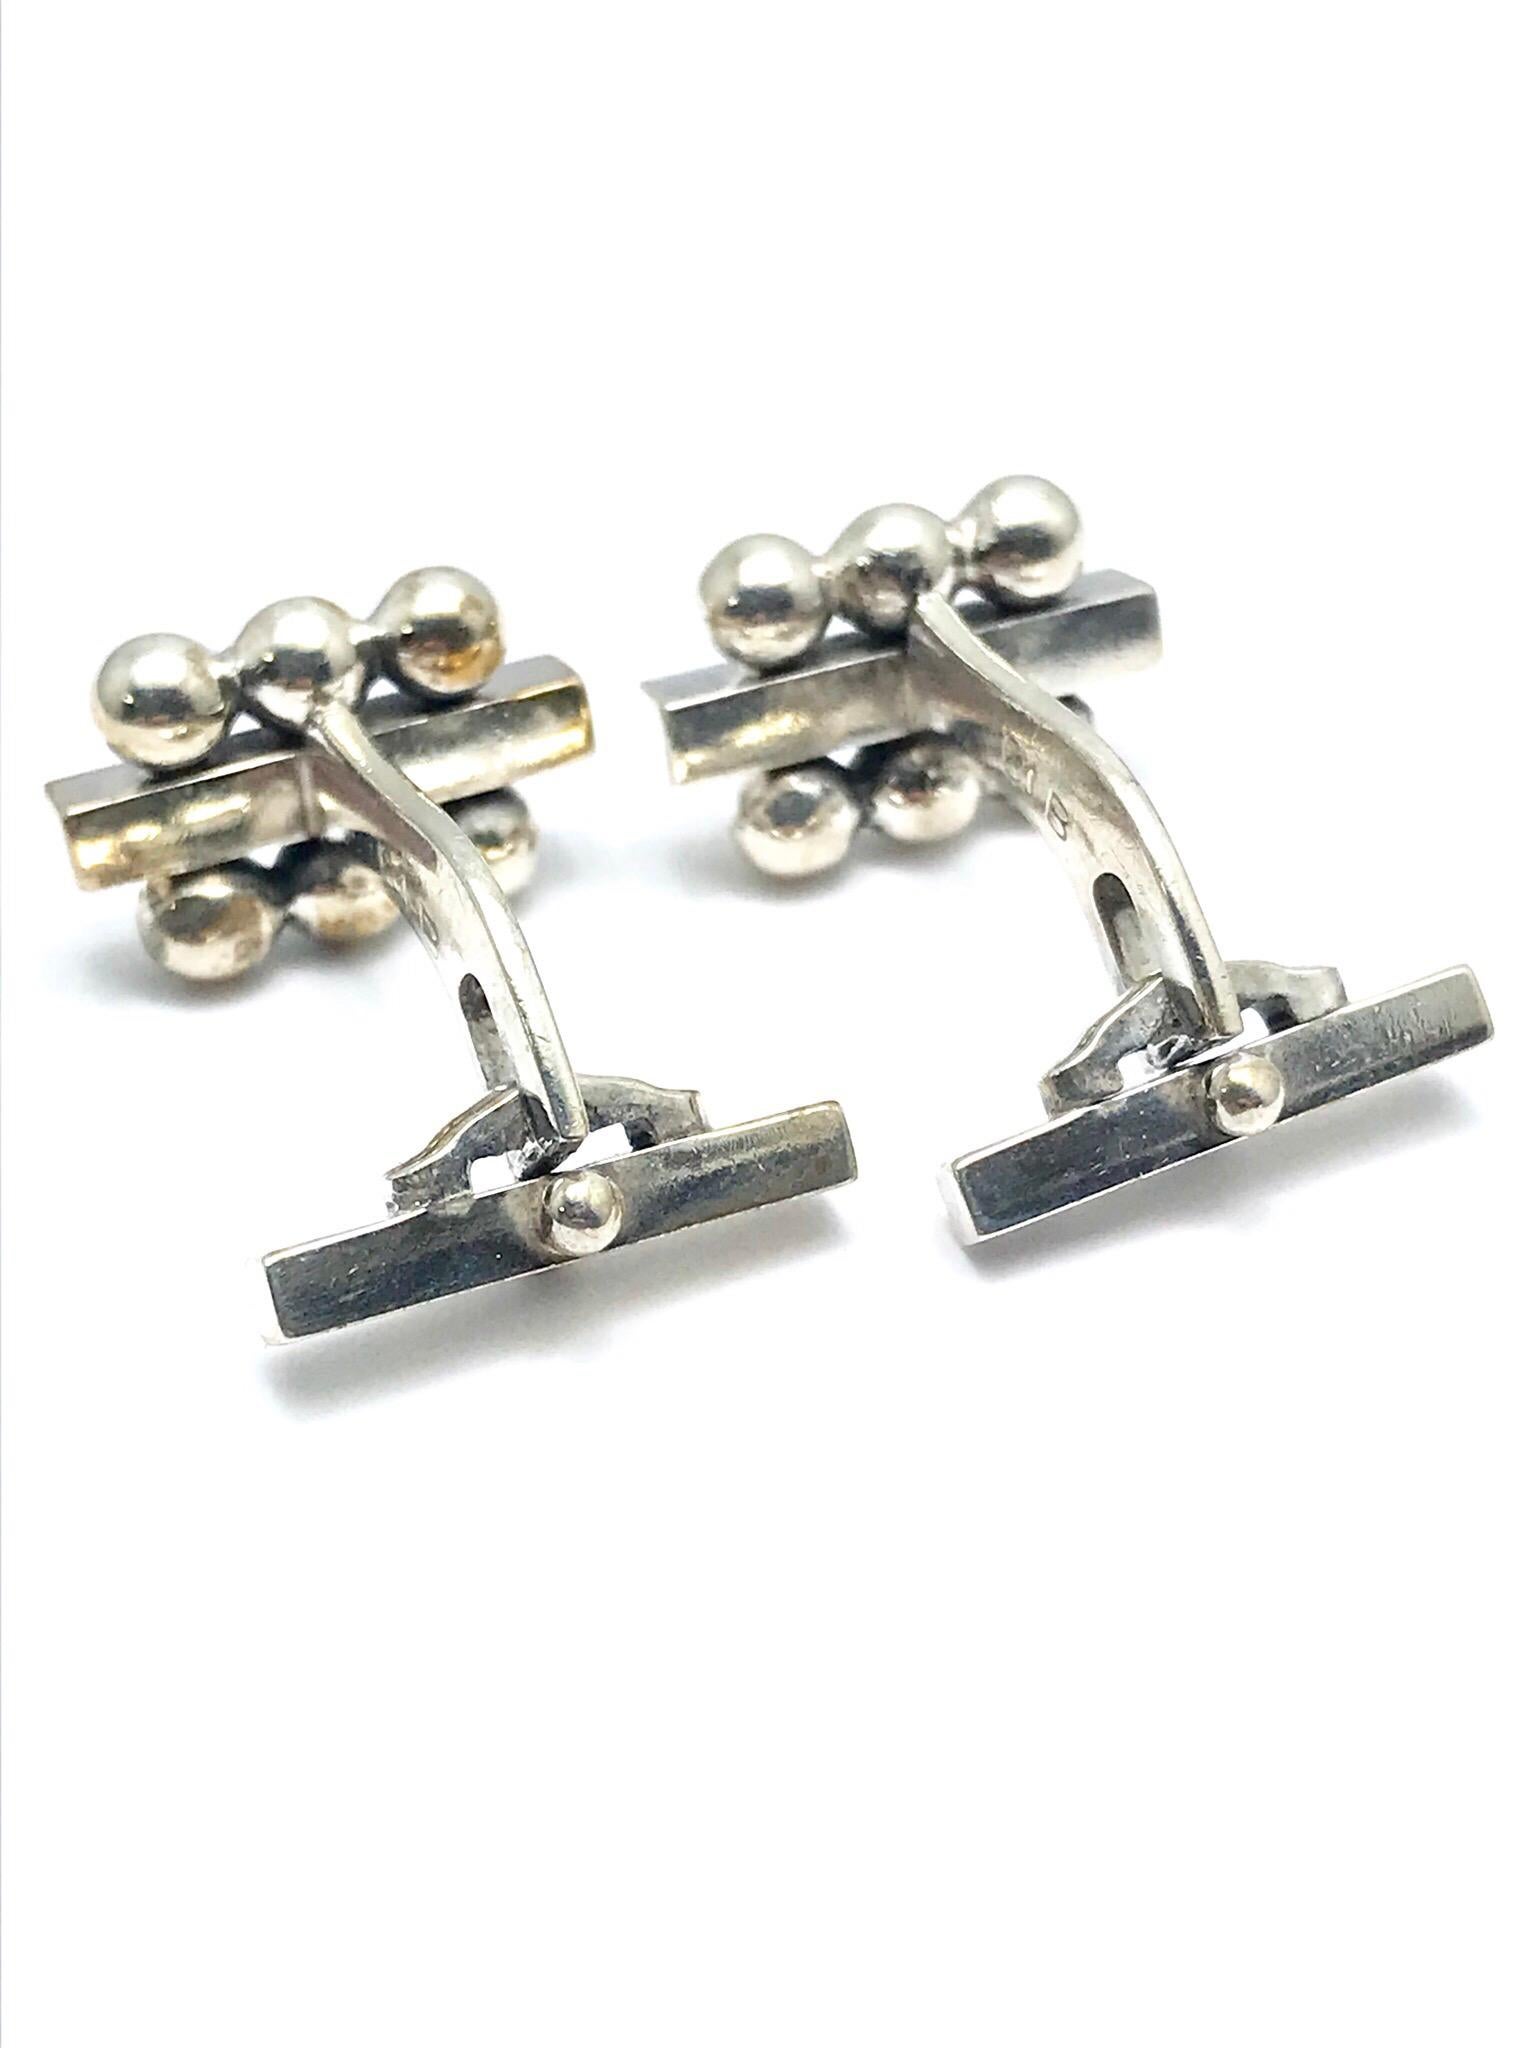 Georg Jensen Sterling Silver Cufflinks No. 61B with a Toggle Back 1